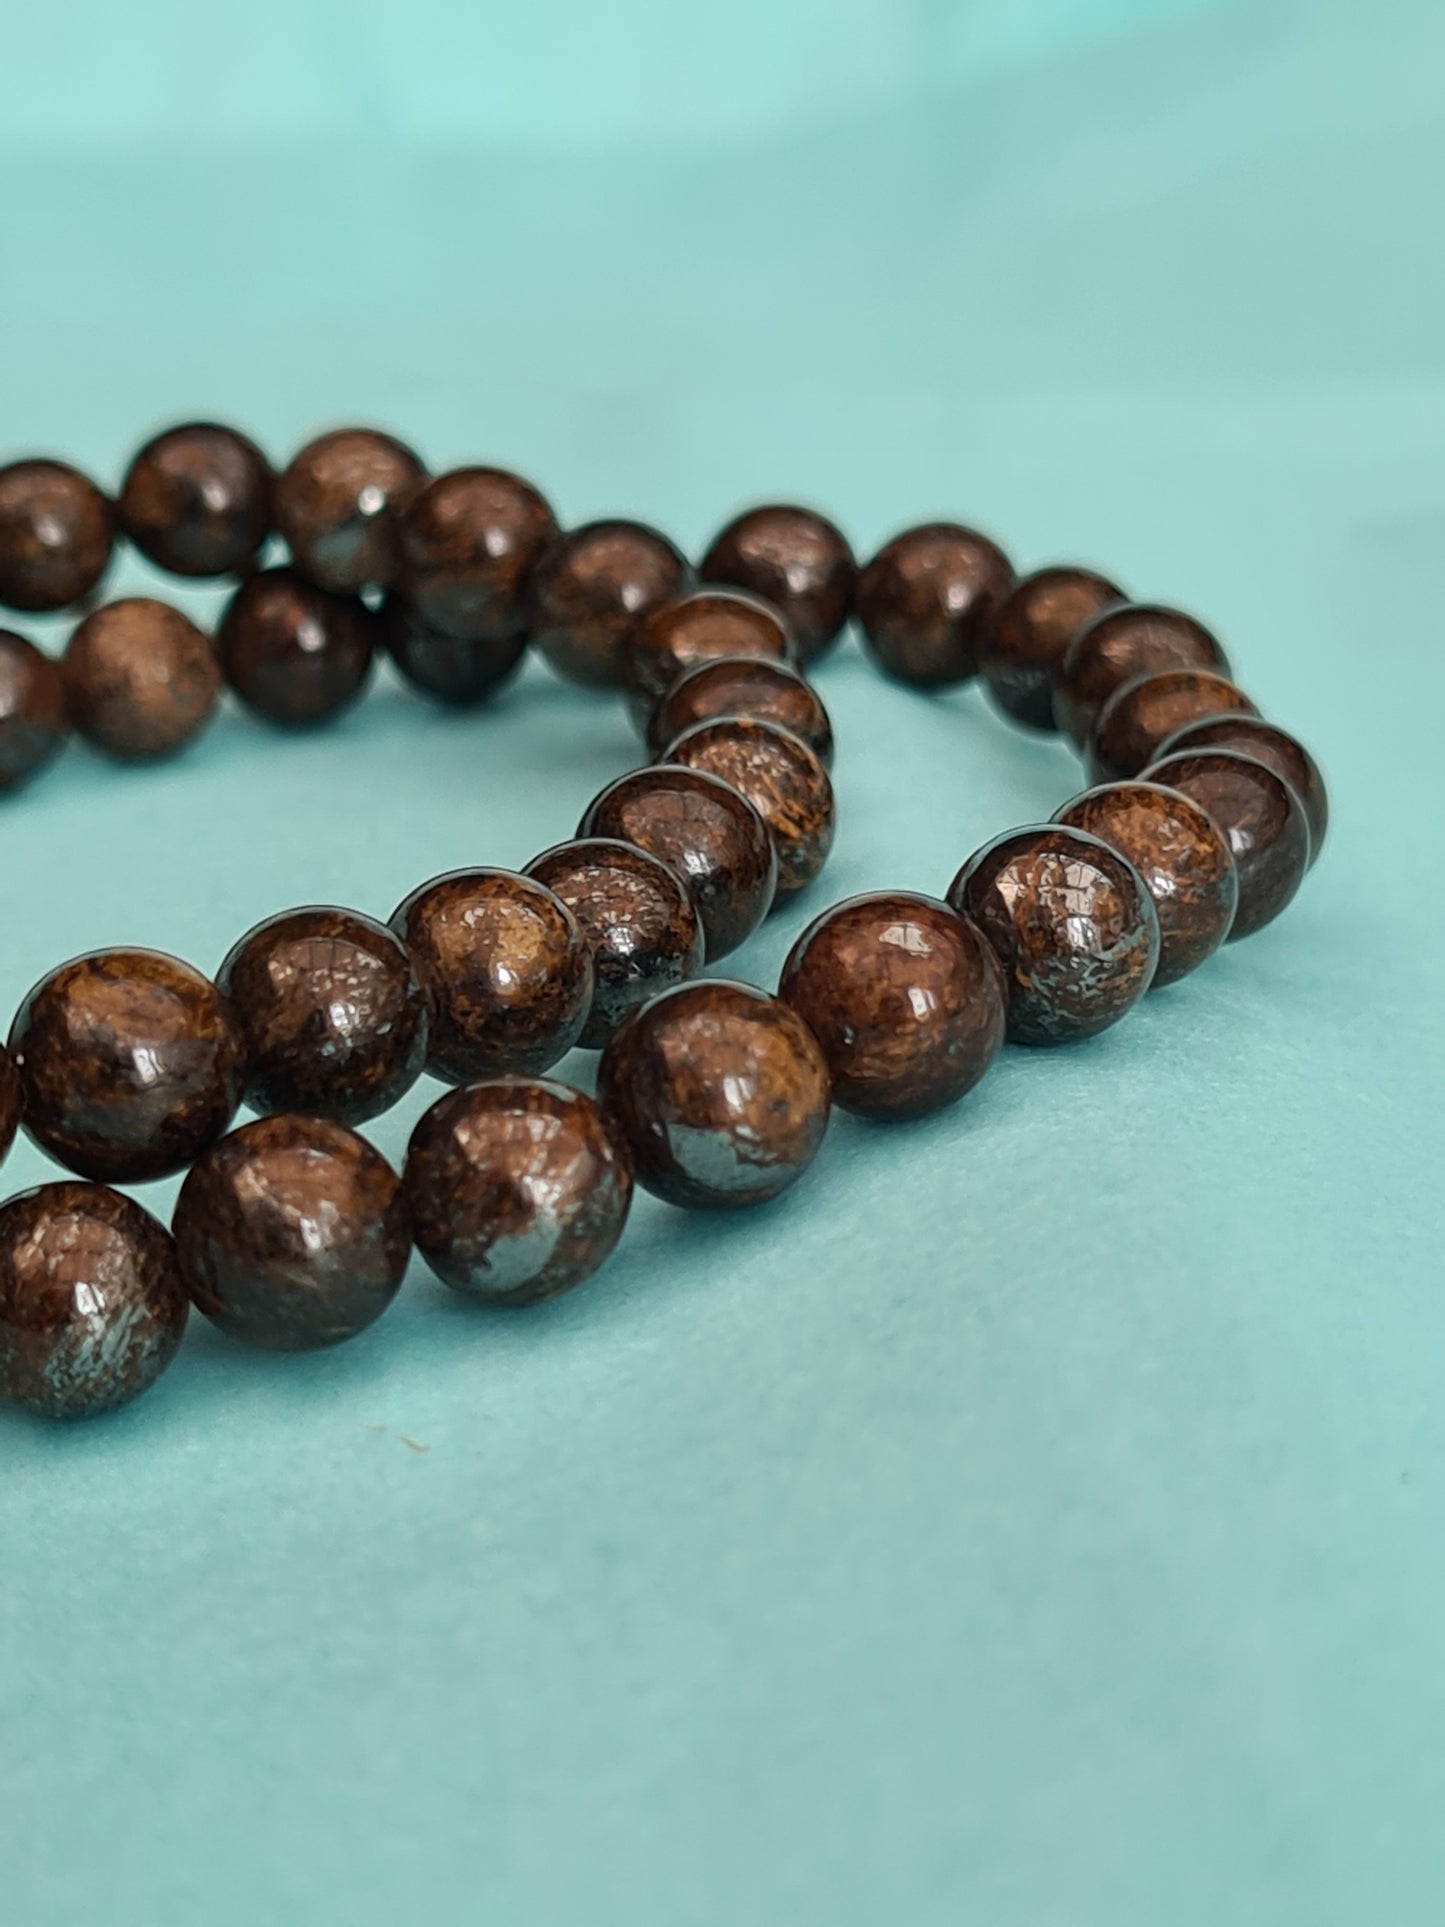 Two Bronzite Crystal 6mm Beaded Bracelets in warming brown and gold tones